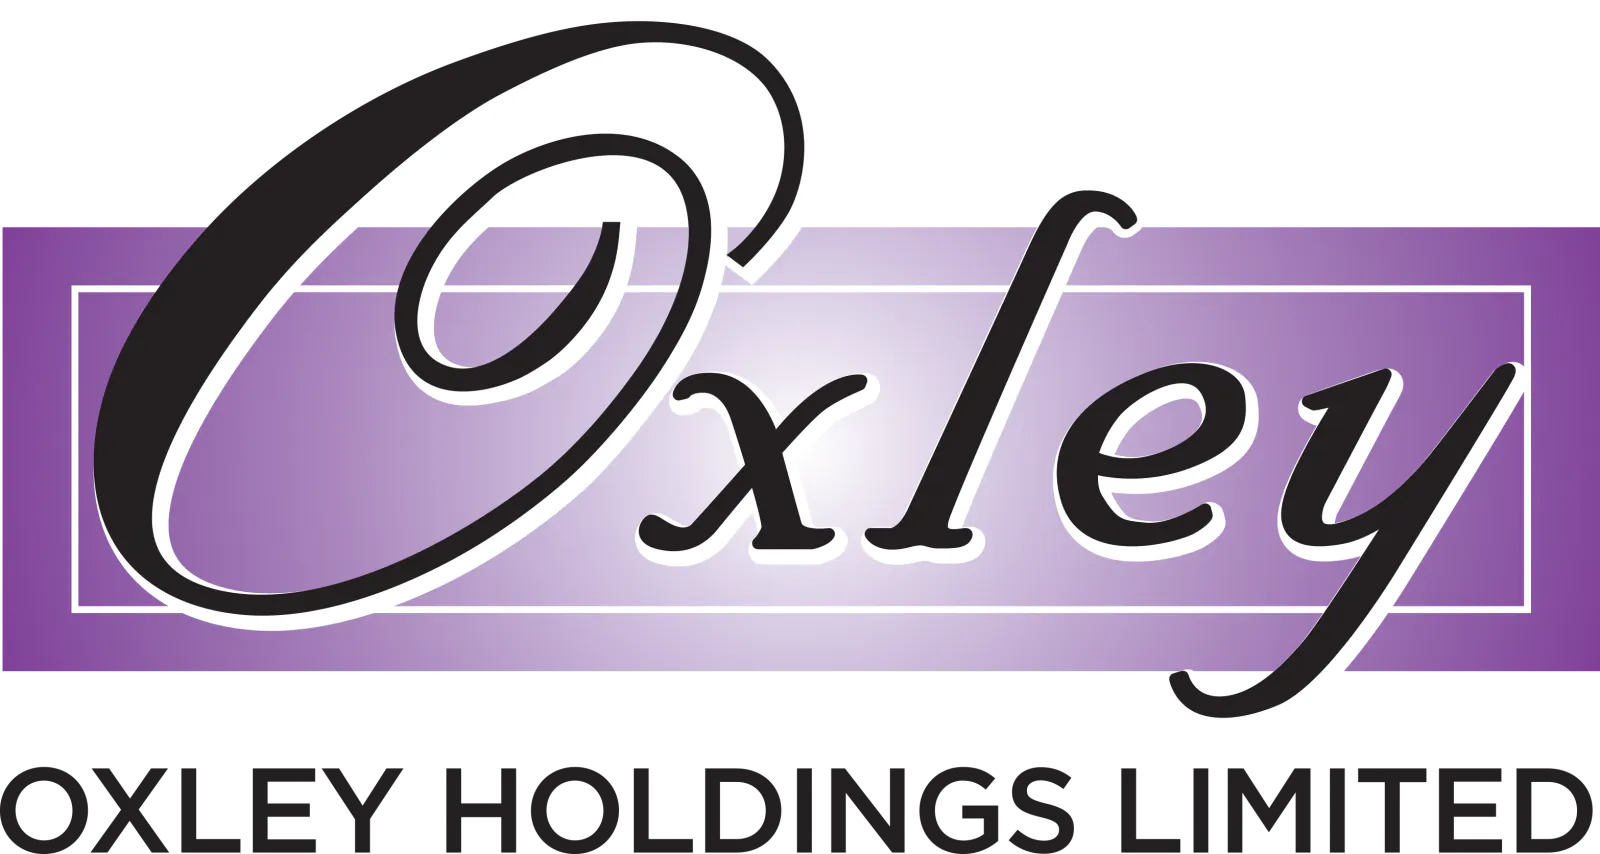 Oxley Holdings Limited